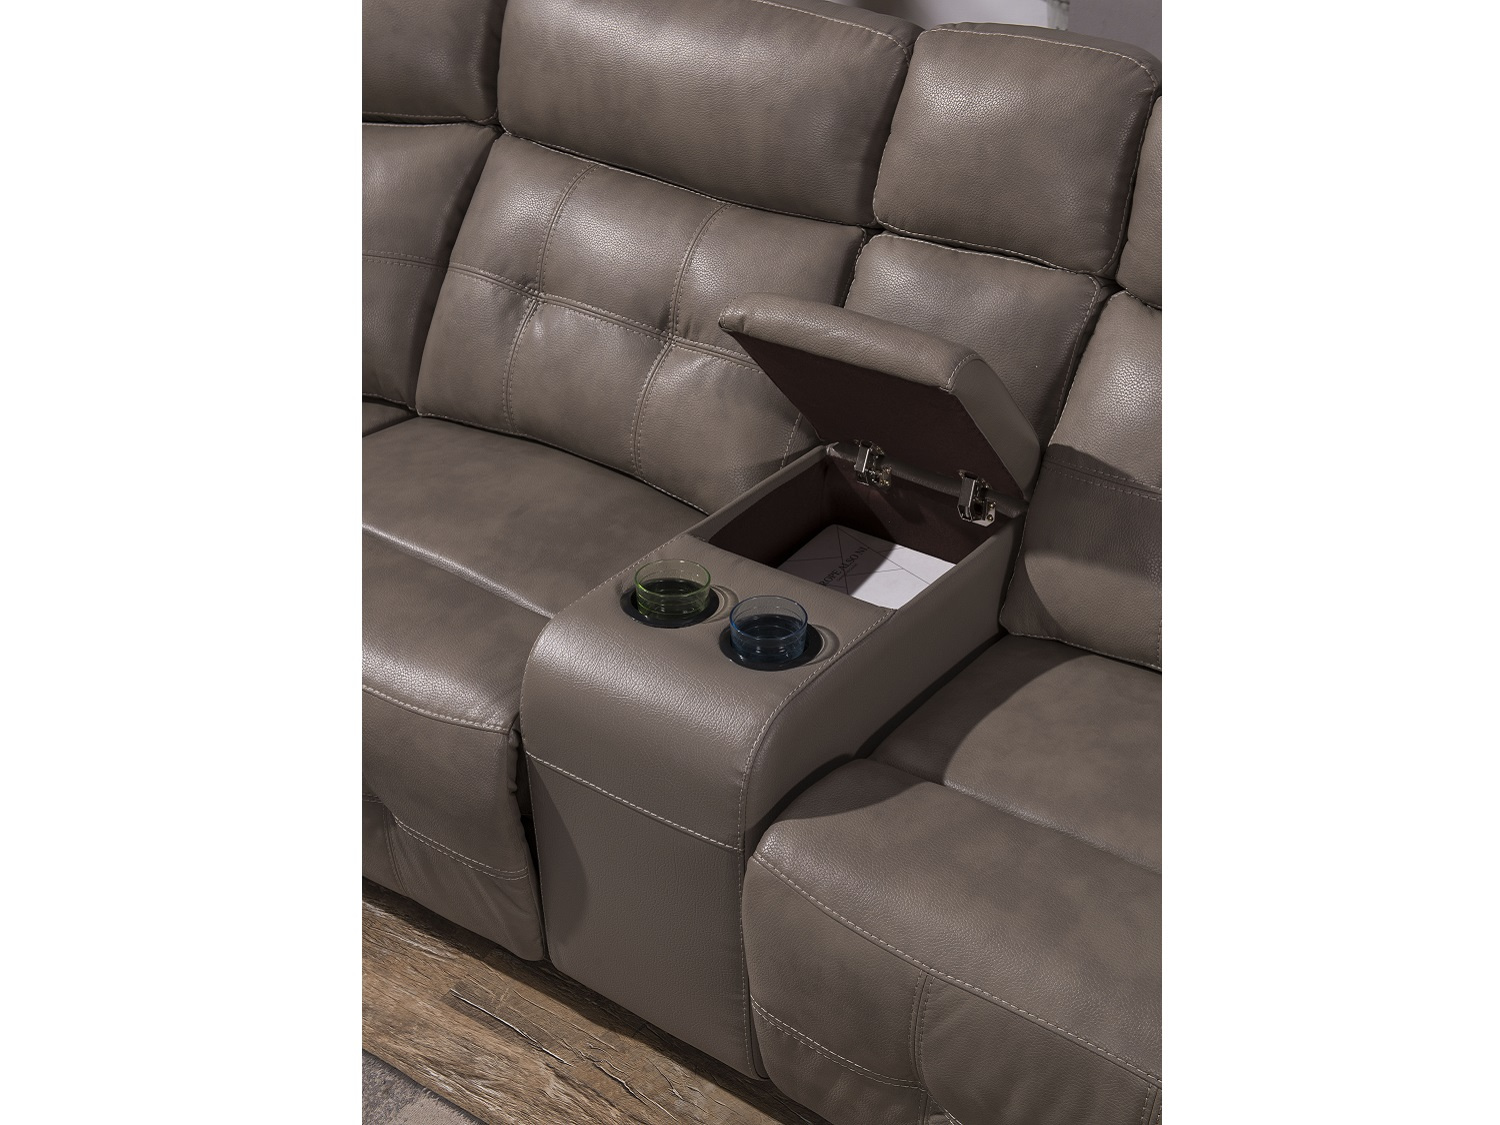 MOUNTOUR Leather Reclining Sectional - Console